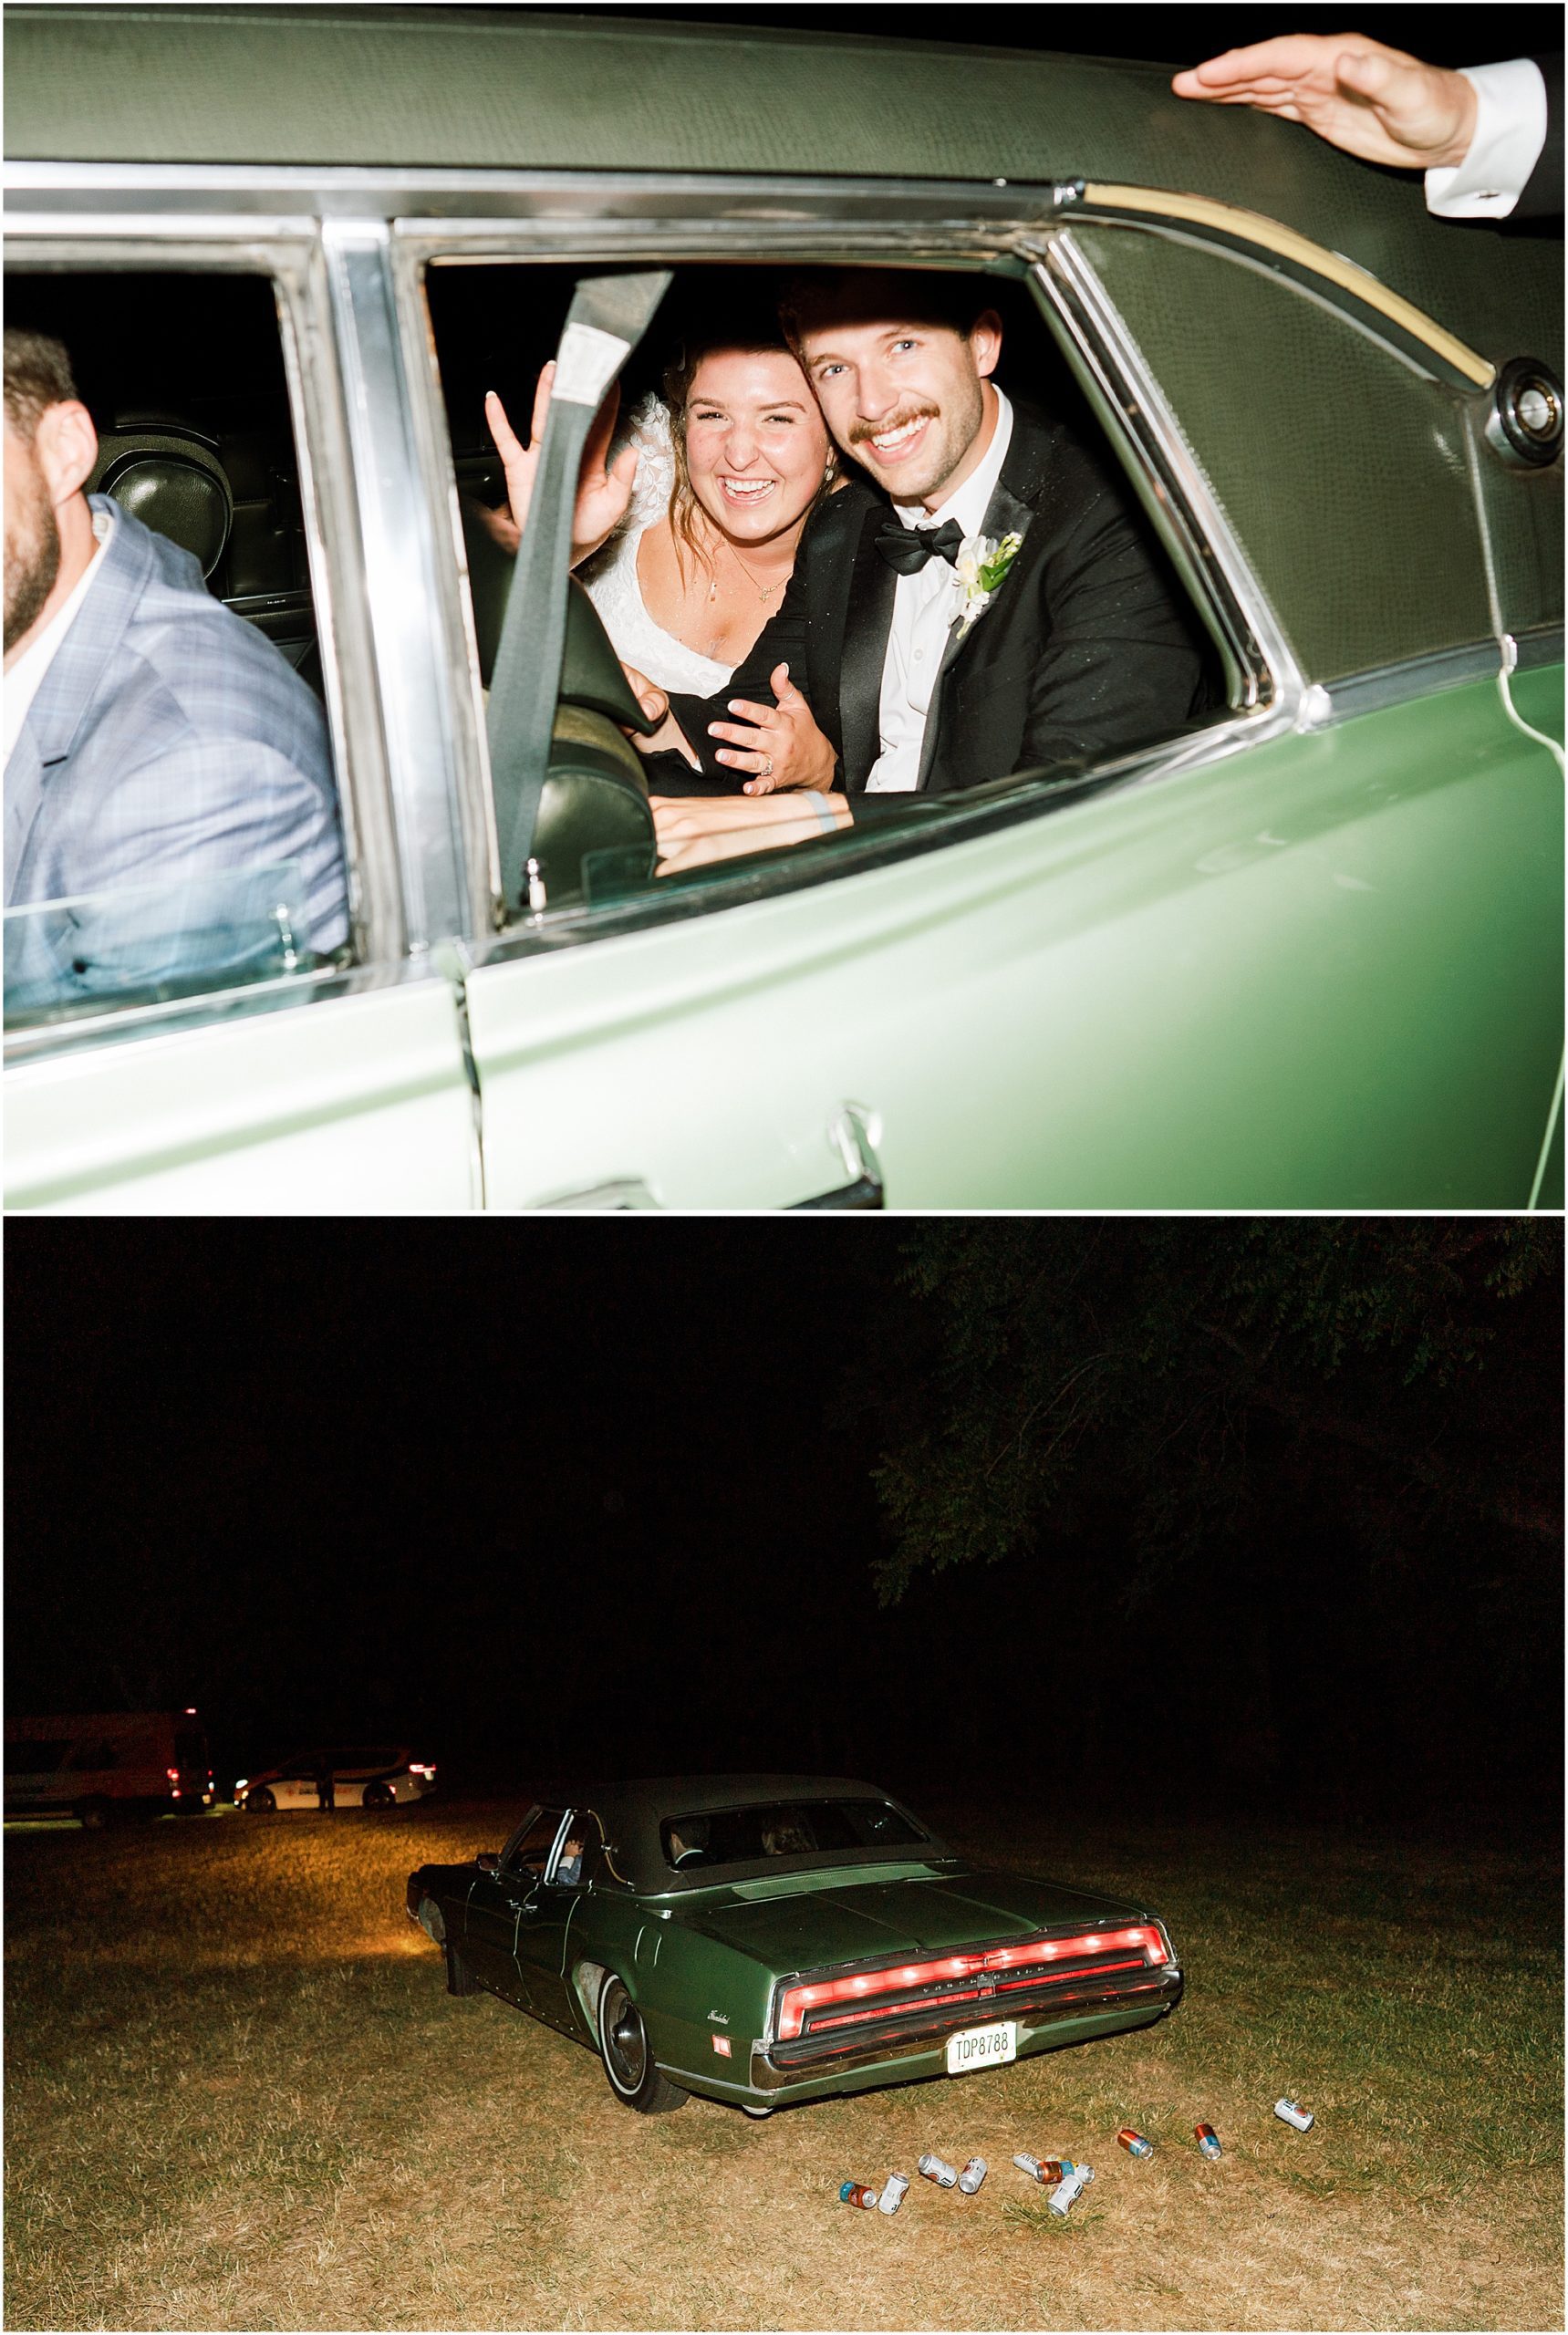 Bride and groom exit in vintage green getaway car with cans tied to the back.